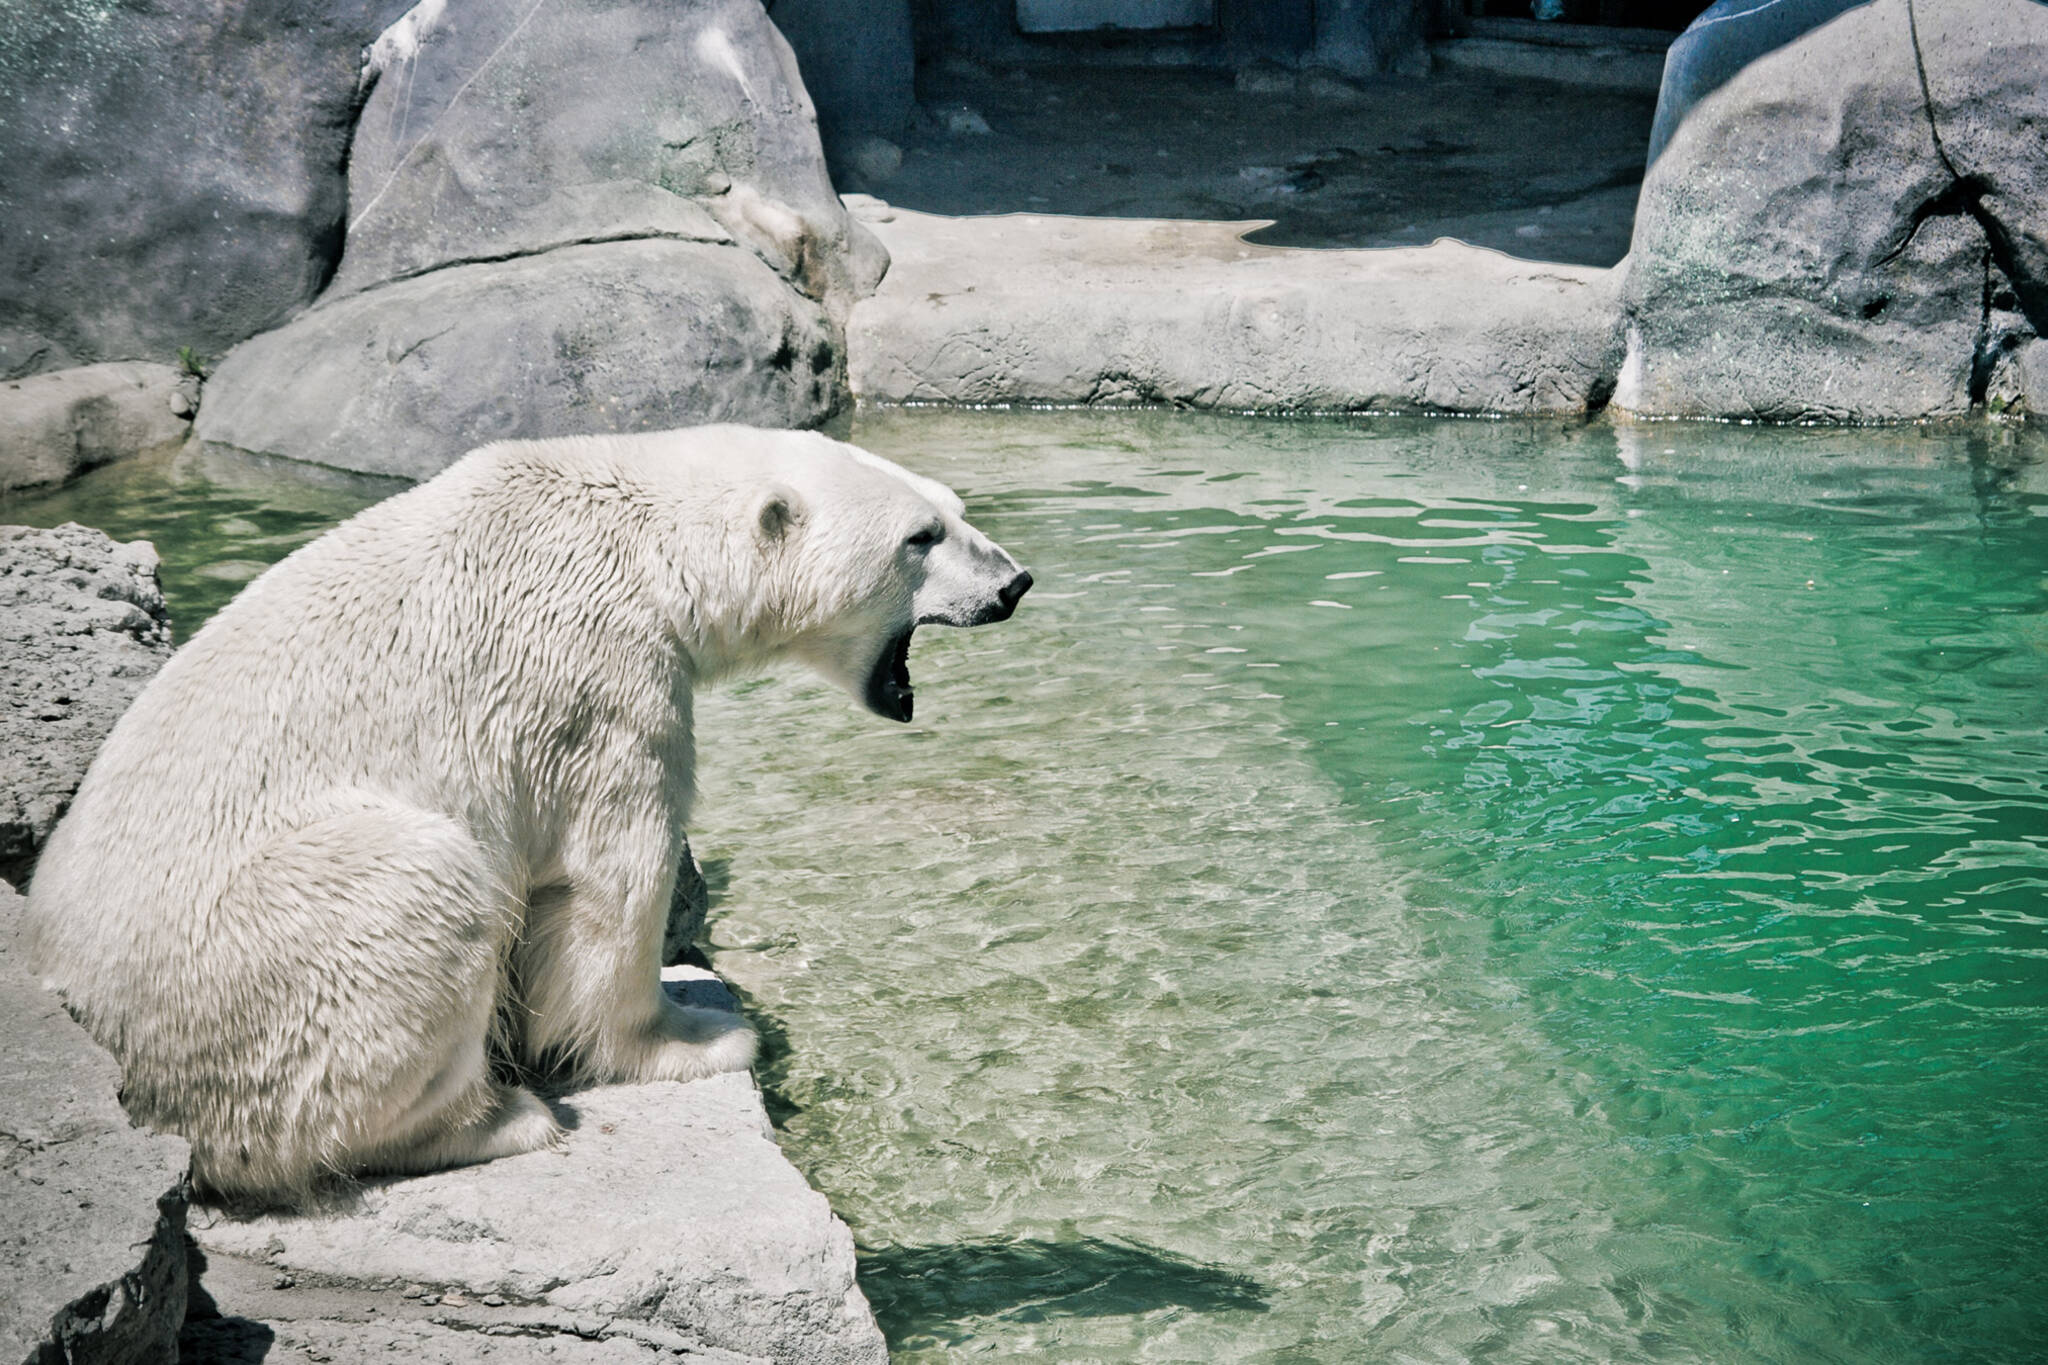 toronto-zoo-could-open-soon-after-tentative-deal-reached